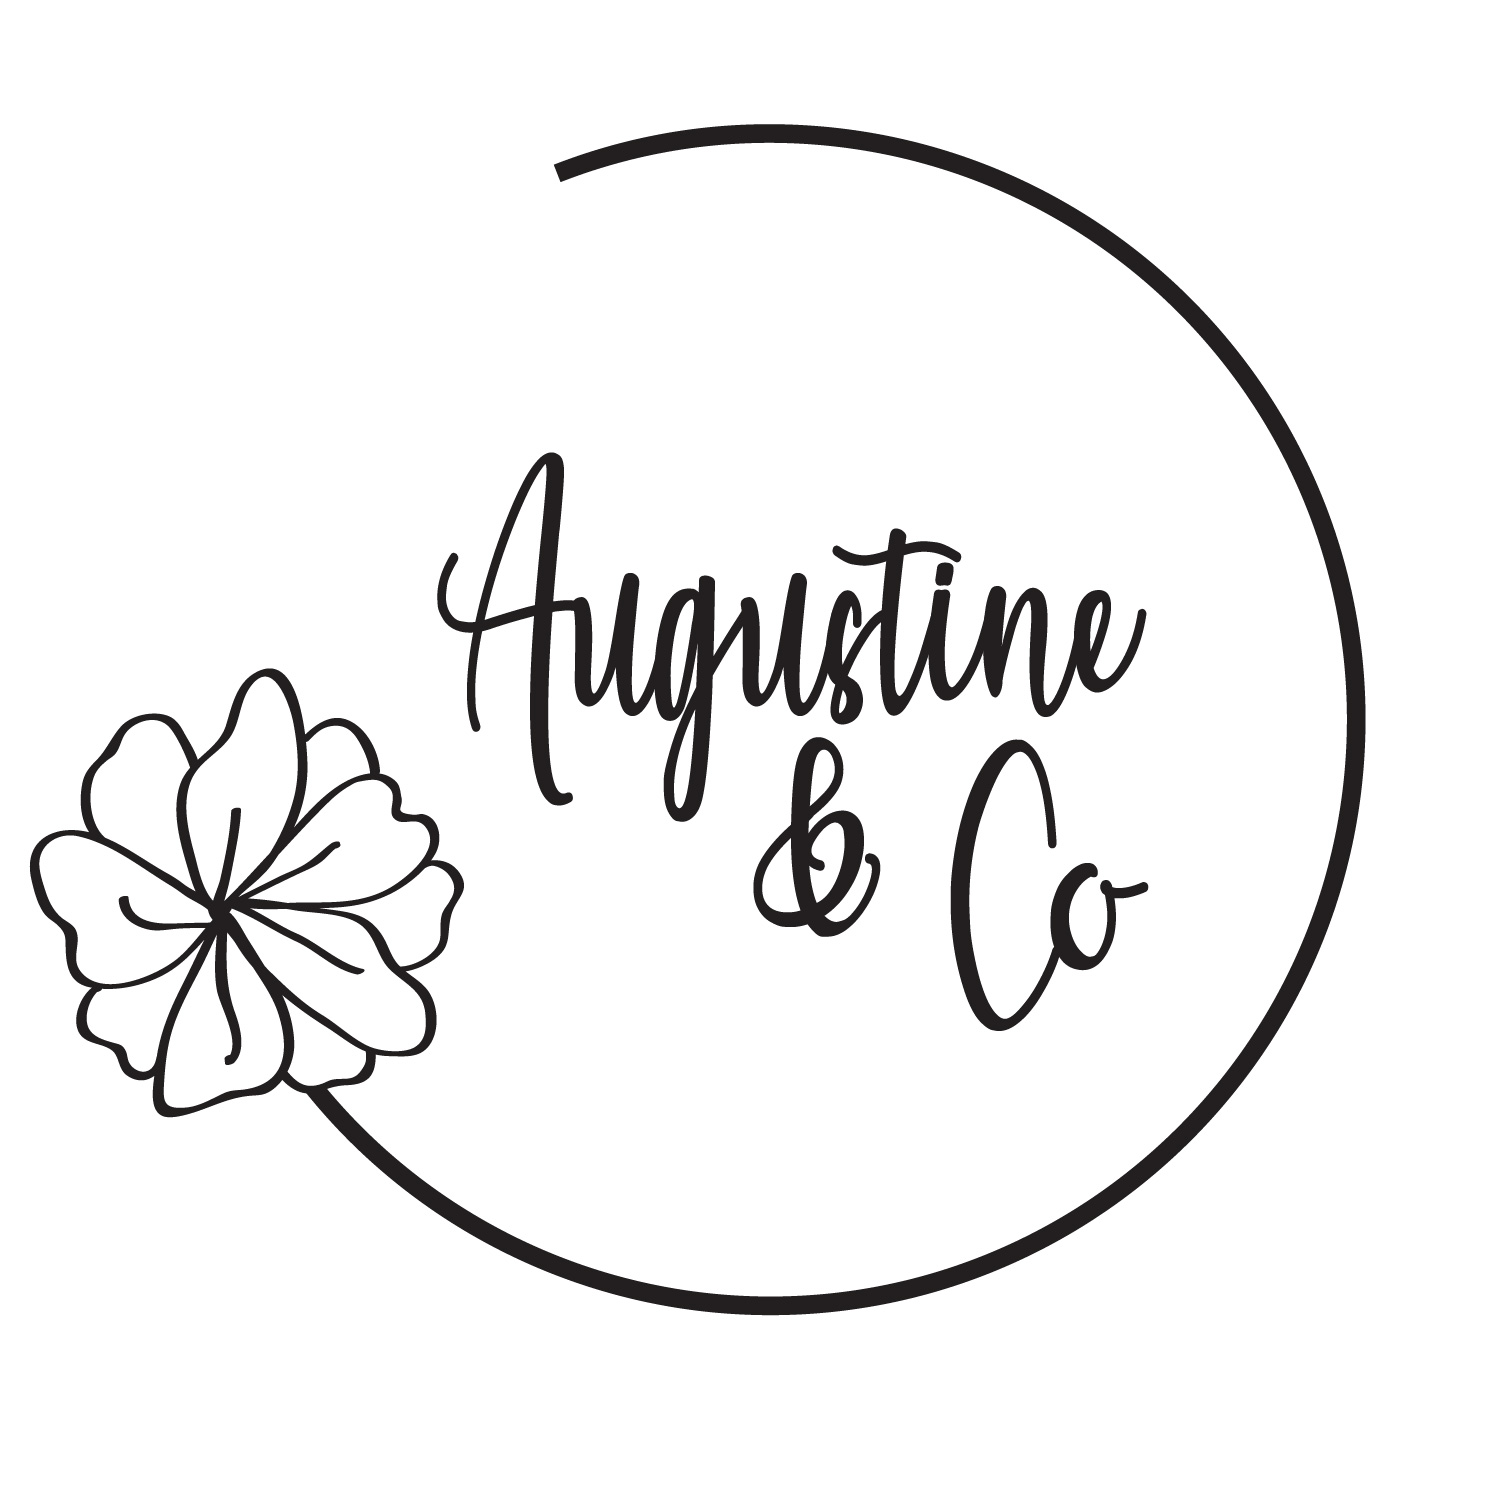 Augustine & Co